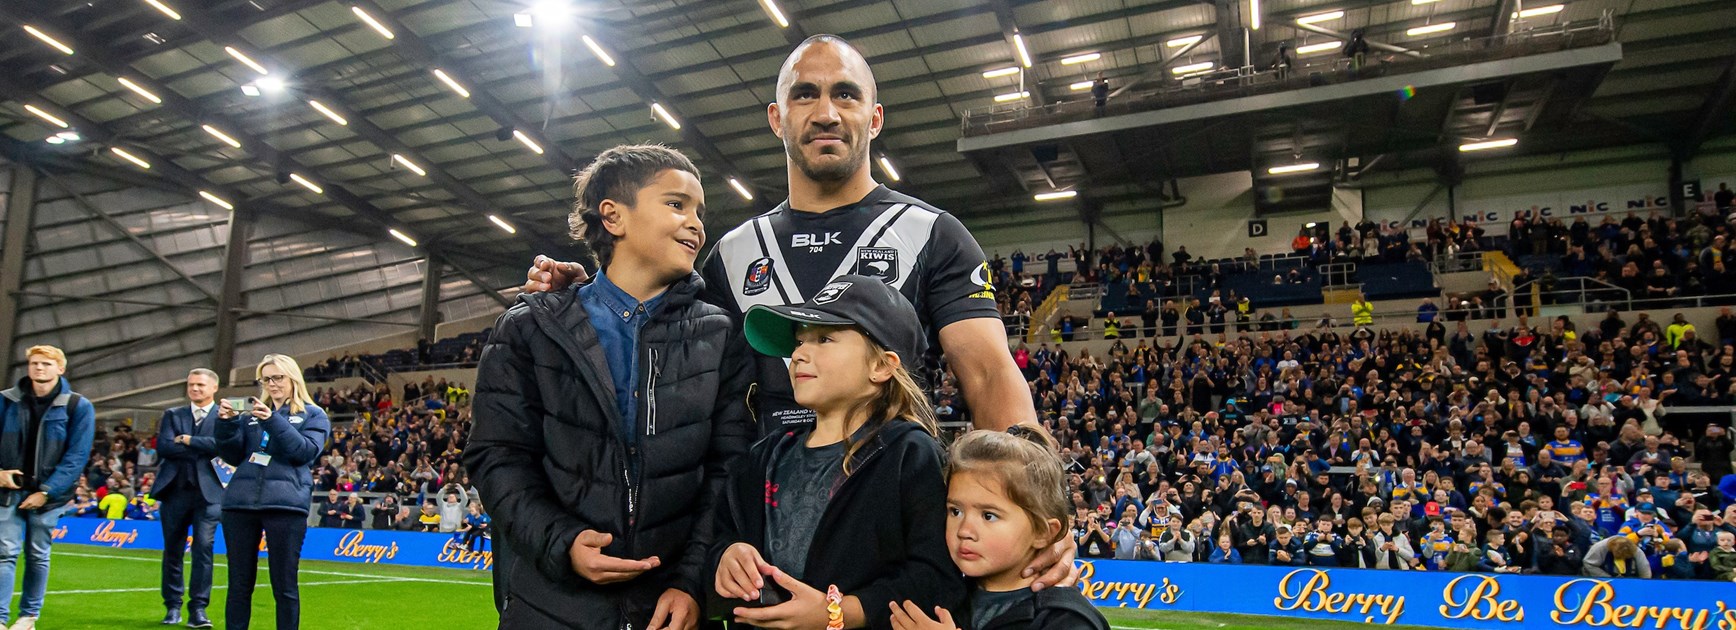 From pimply teen to revered Kiwi: Leuluai finishes in style